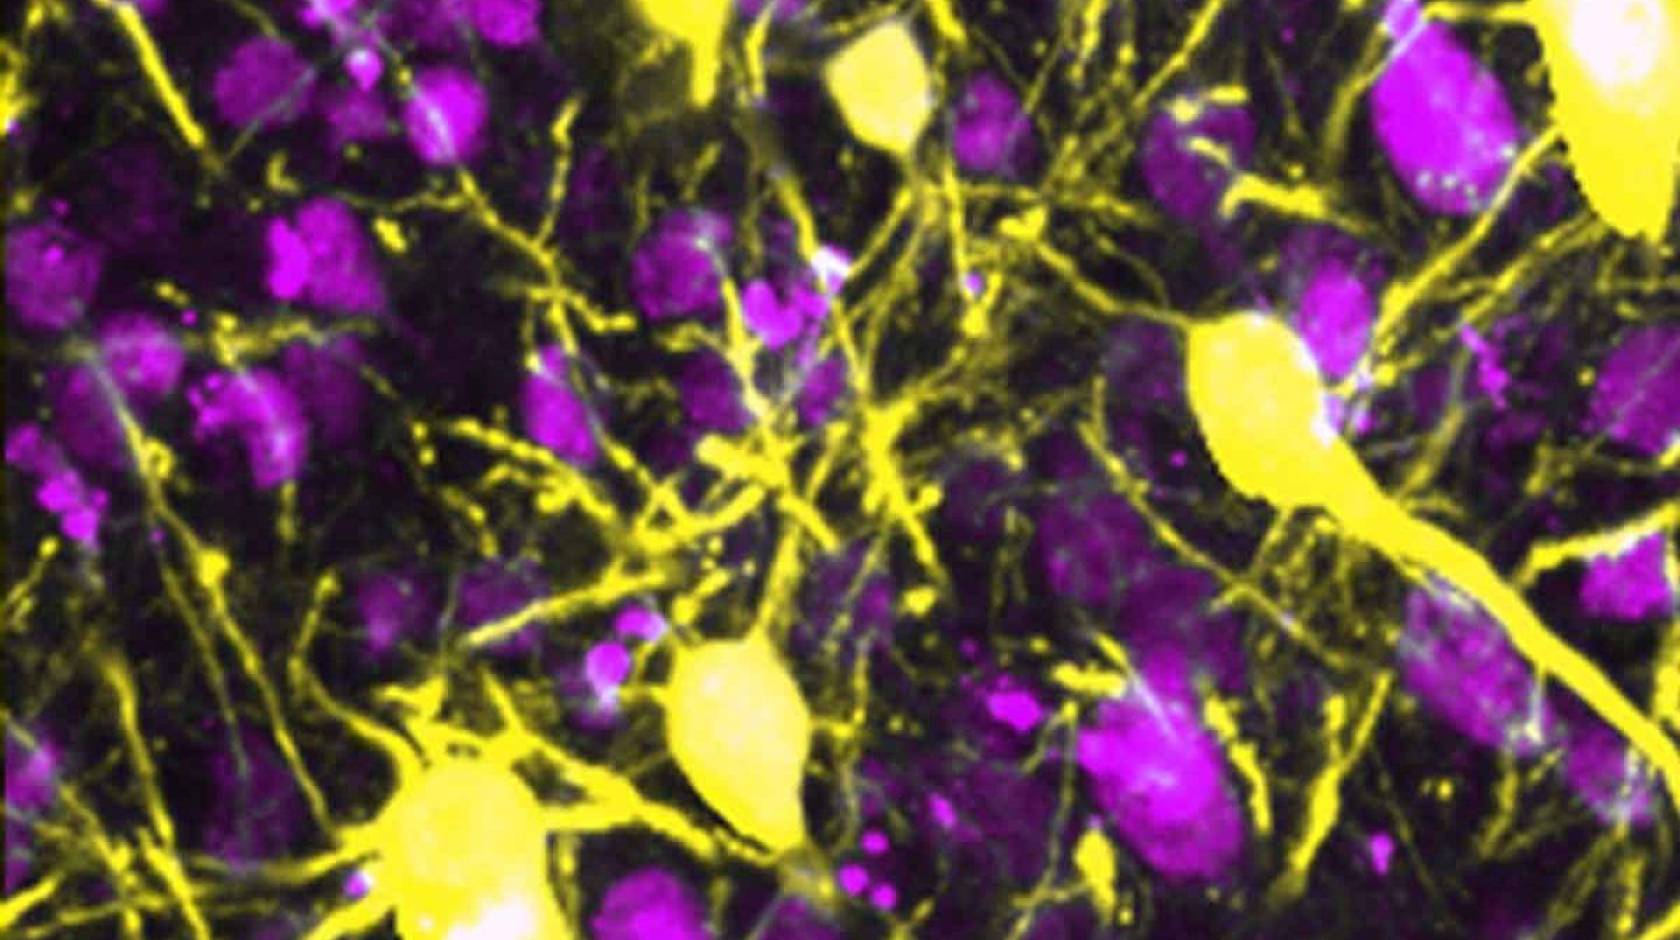 neurons imaged in bright pink and yellow colors